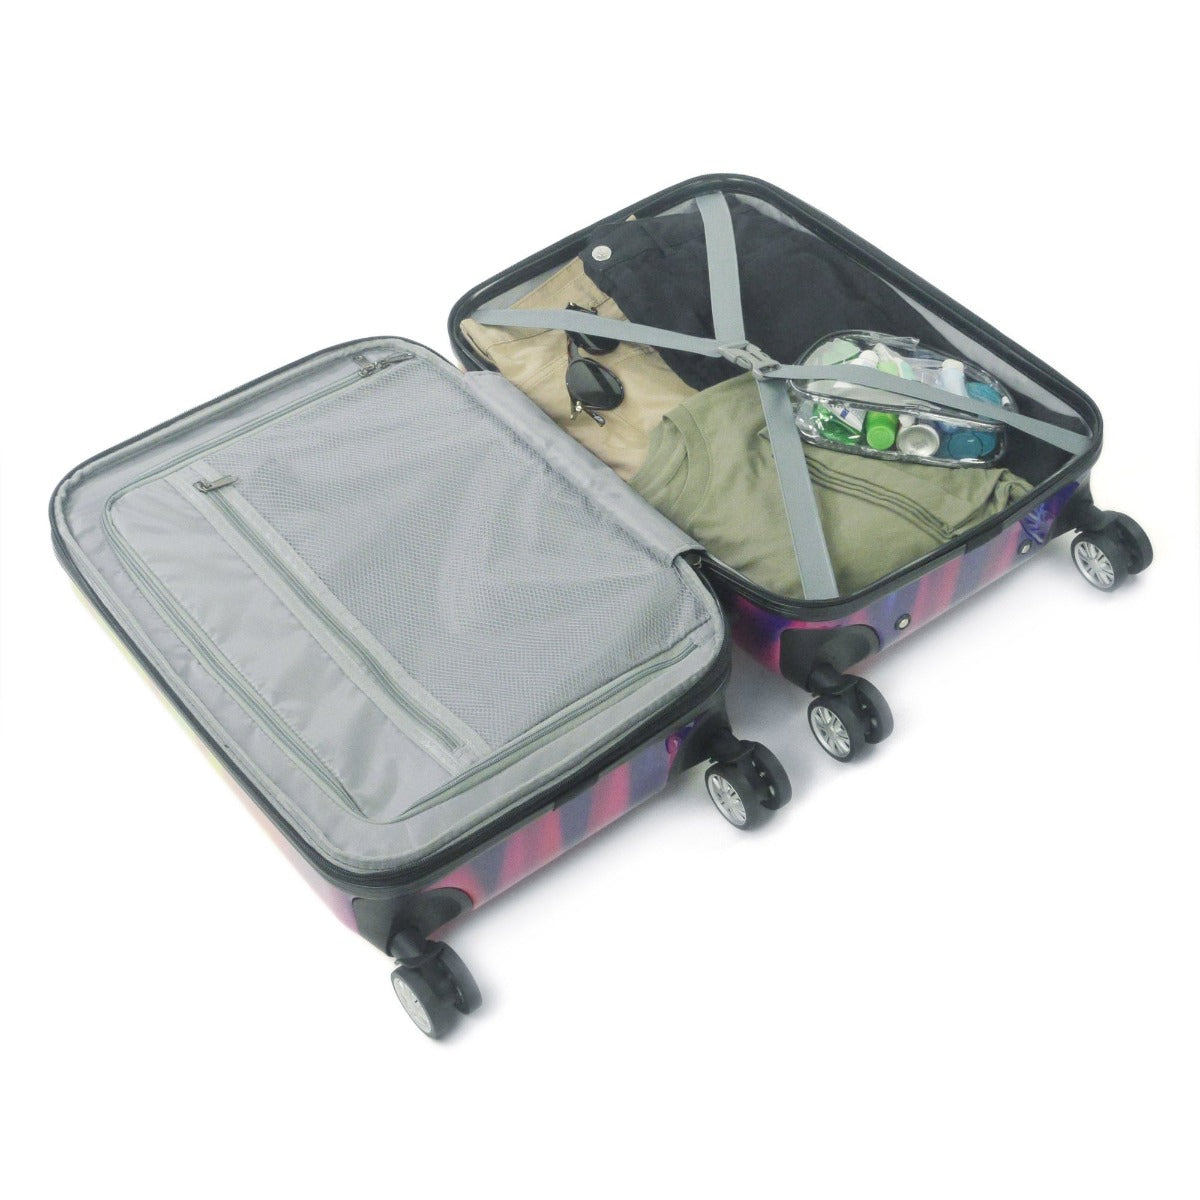 Tie dye Rainbow Swirl Suitcase Ful Hard sided 3 Pc Rolling Spinner Luggage Set 22" 24" 28" On Sale $50 off Interior